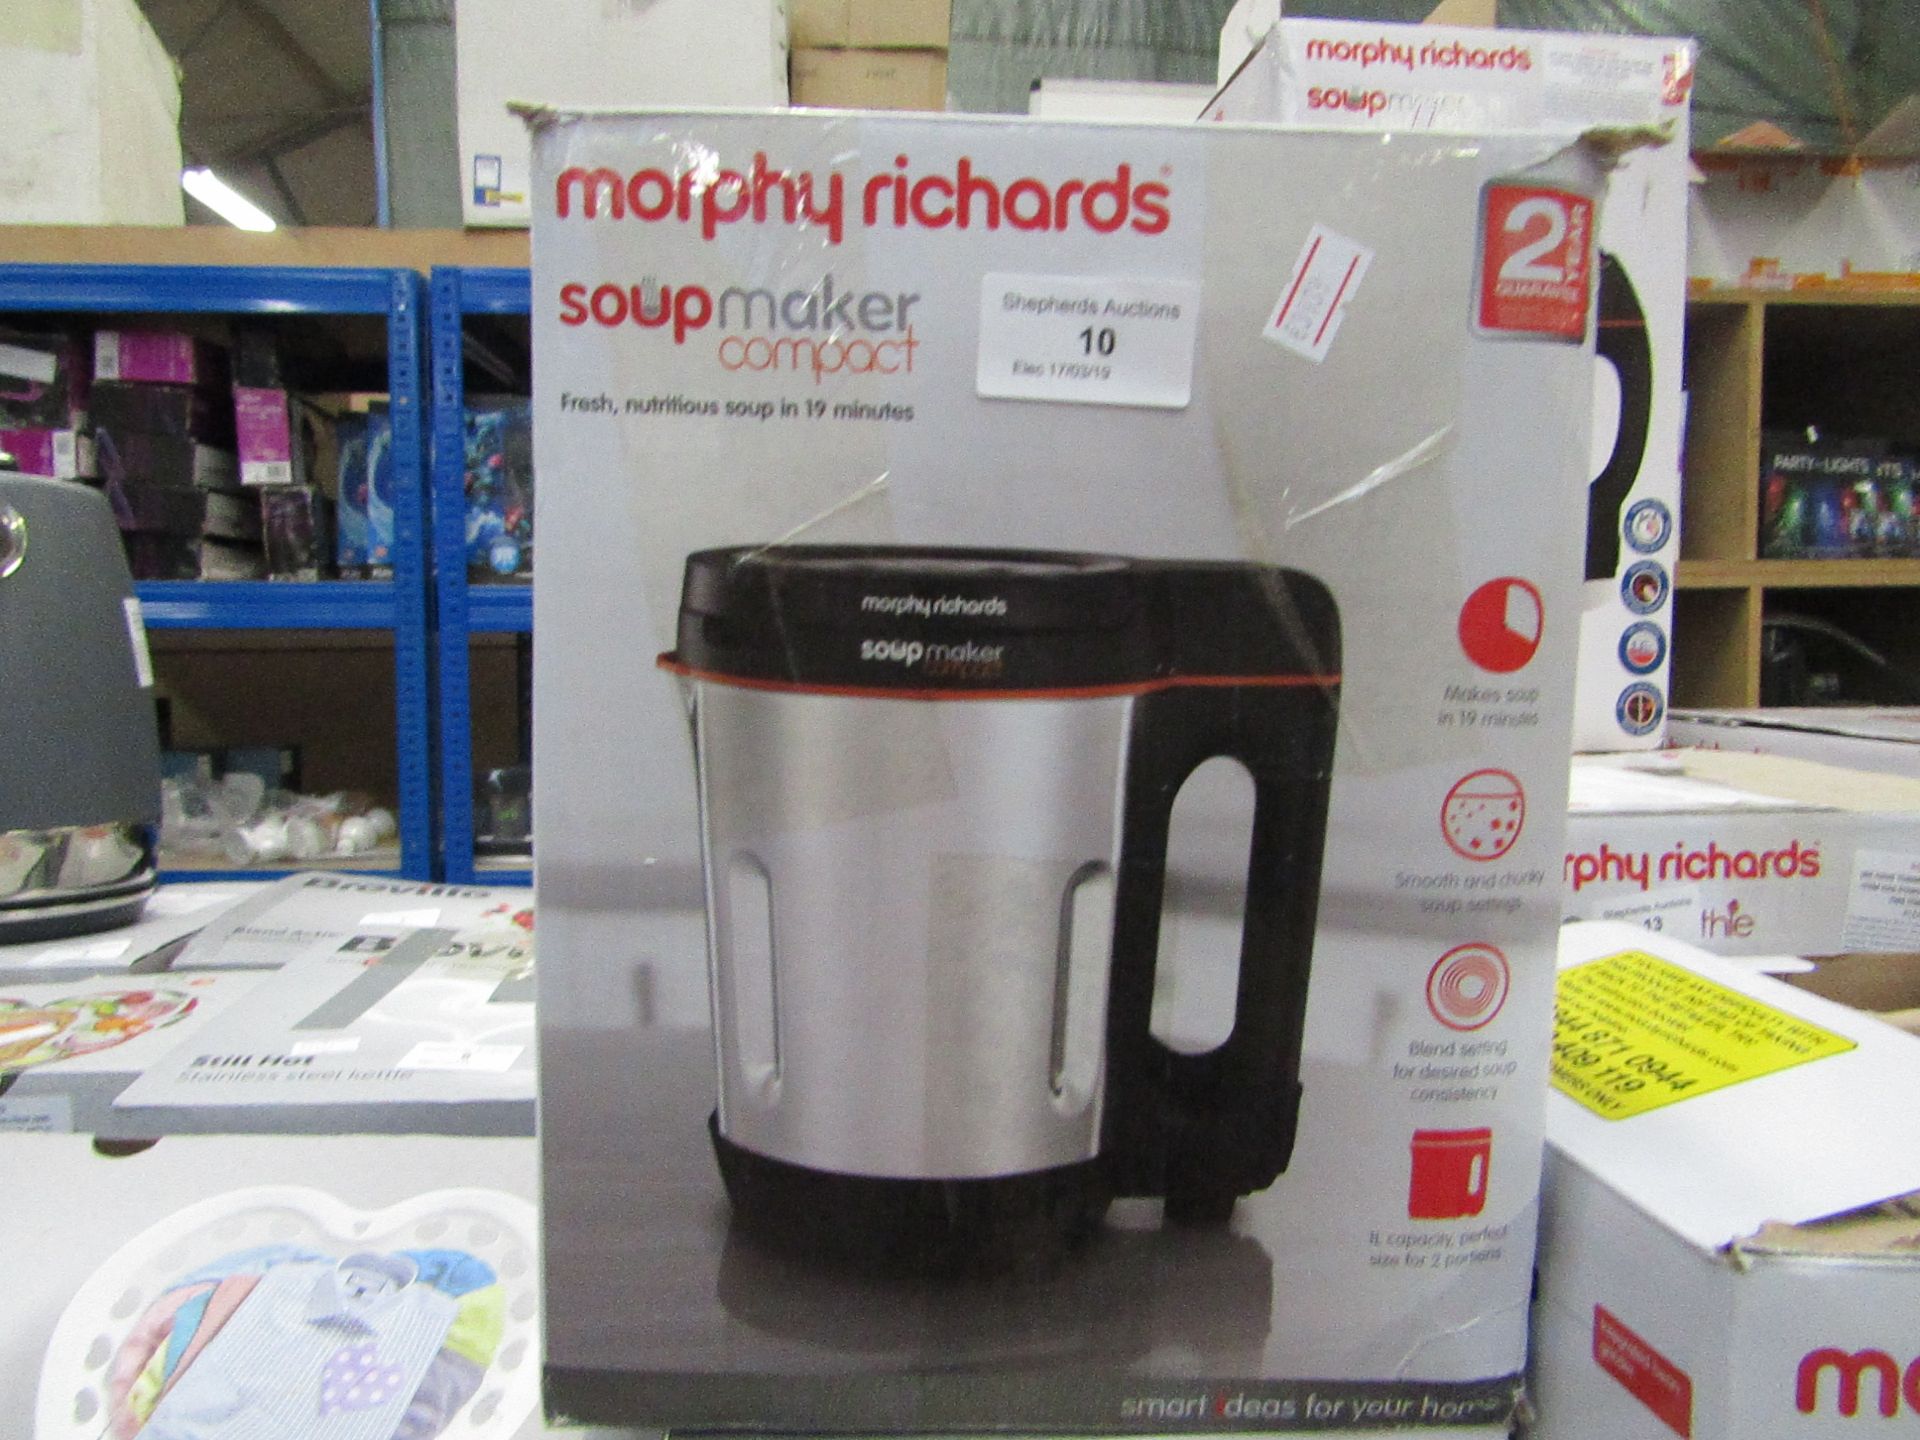 Morphy Richards soup maker compact powers on and boxed